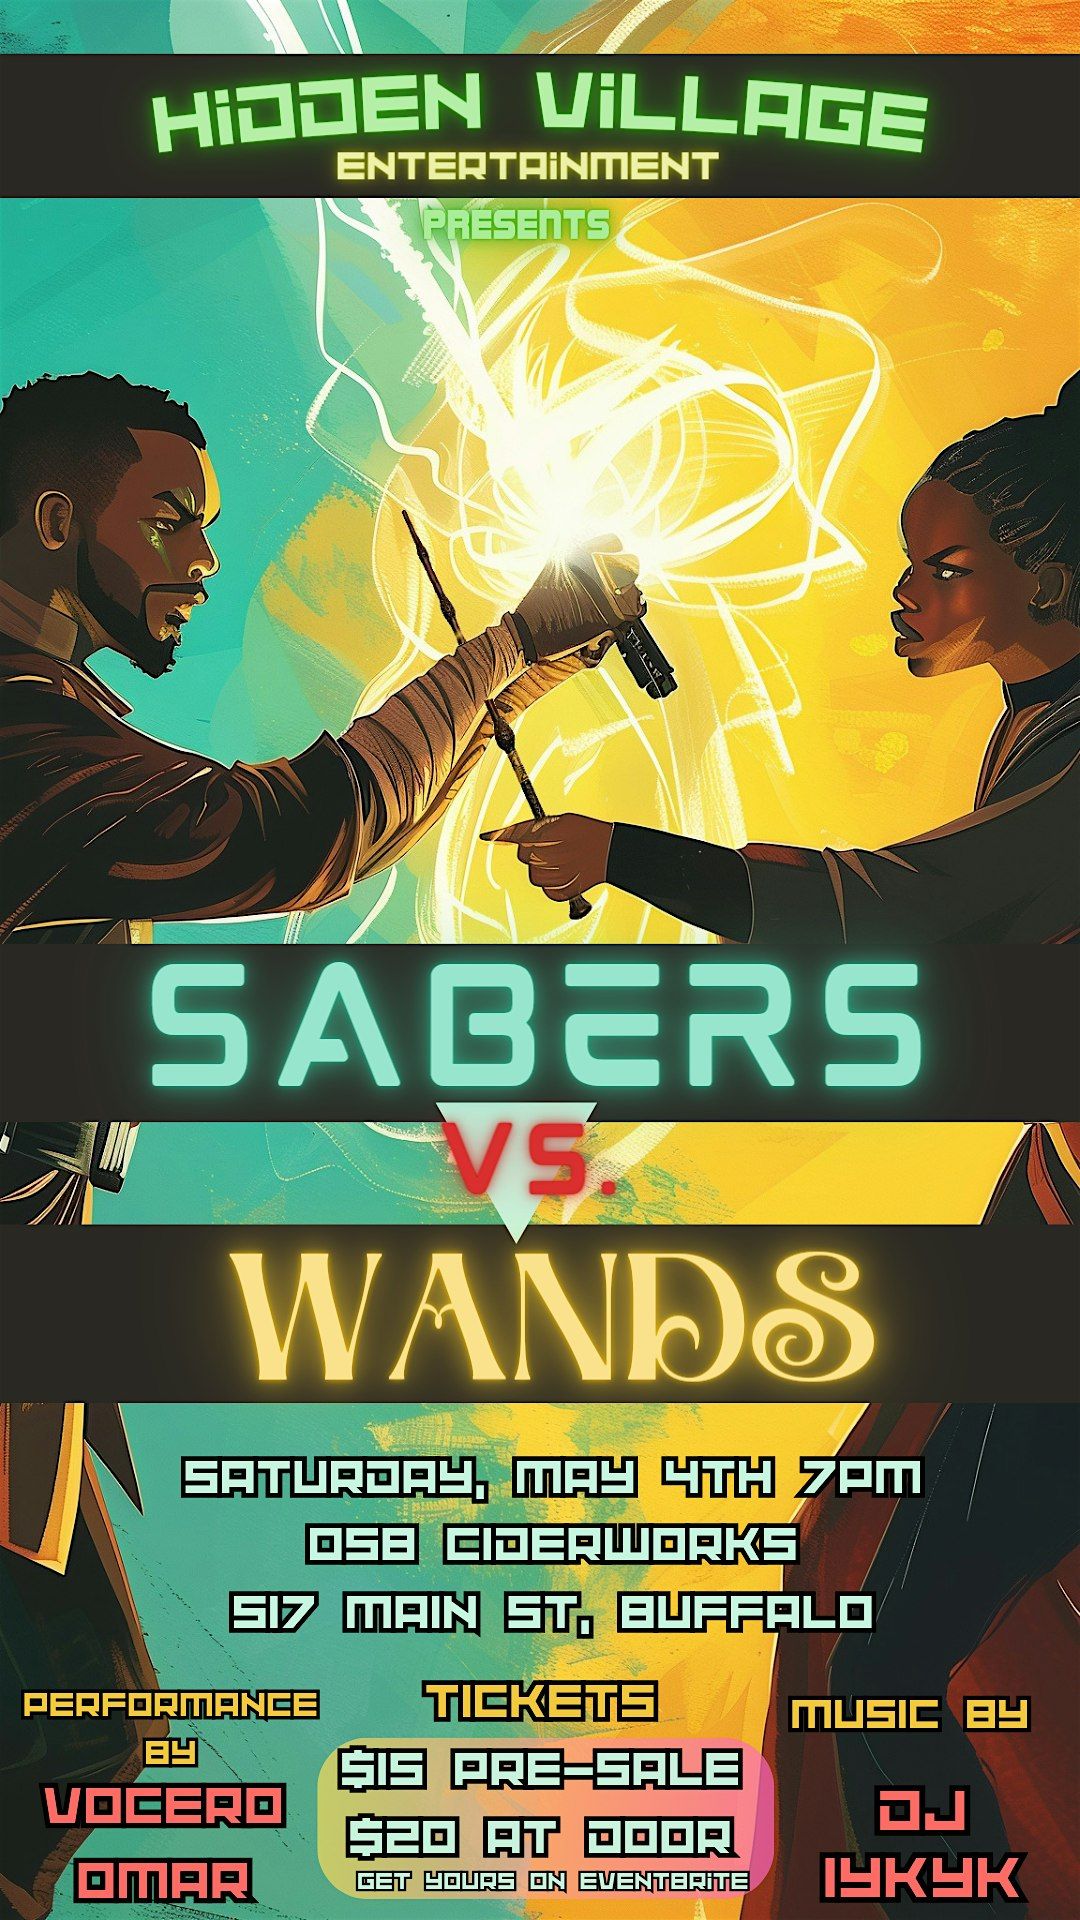 Sabers vs Wands | A May the 4th Blerd Party!